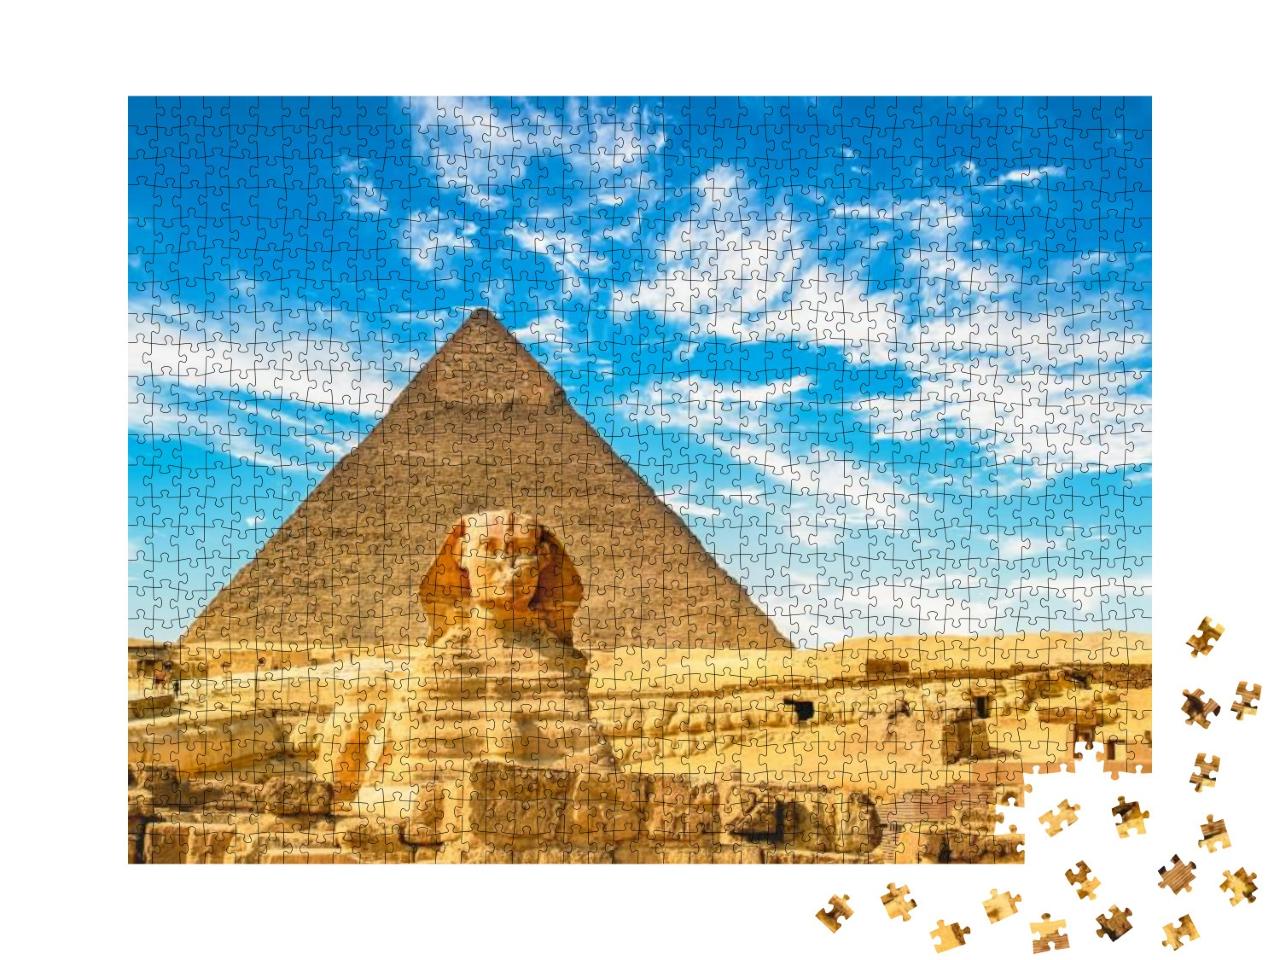 The Sphinx & Pyramid, Cairo, Egypt... Jigsaw Puzzle with 1000 pieces